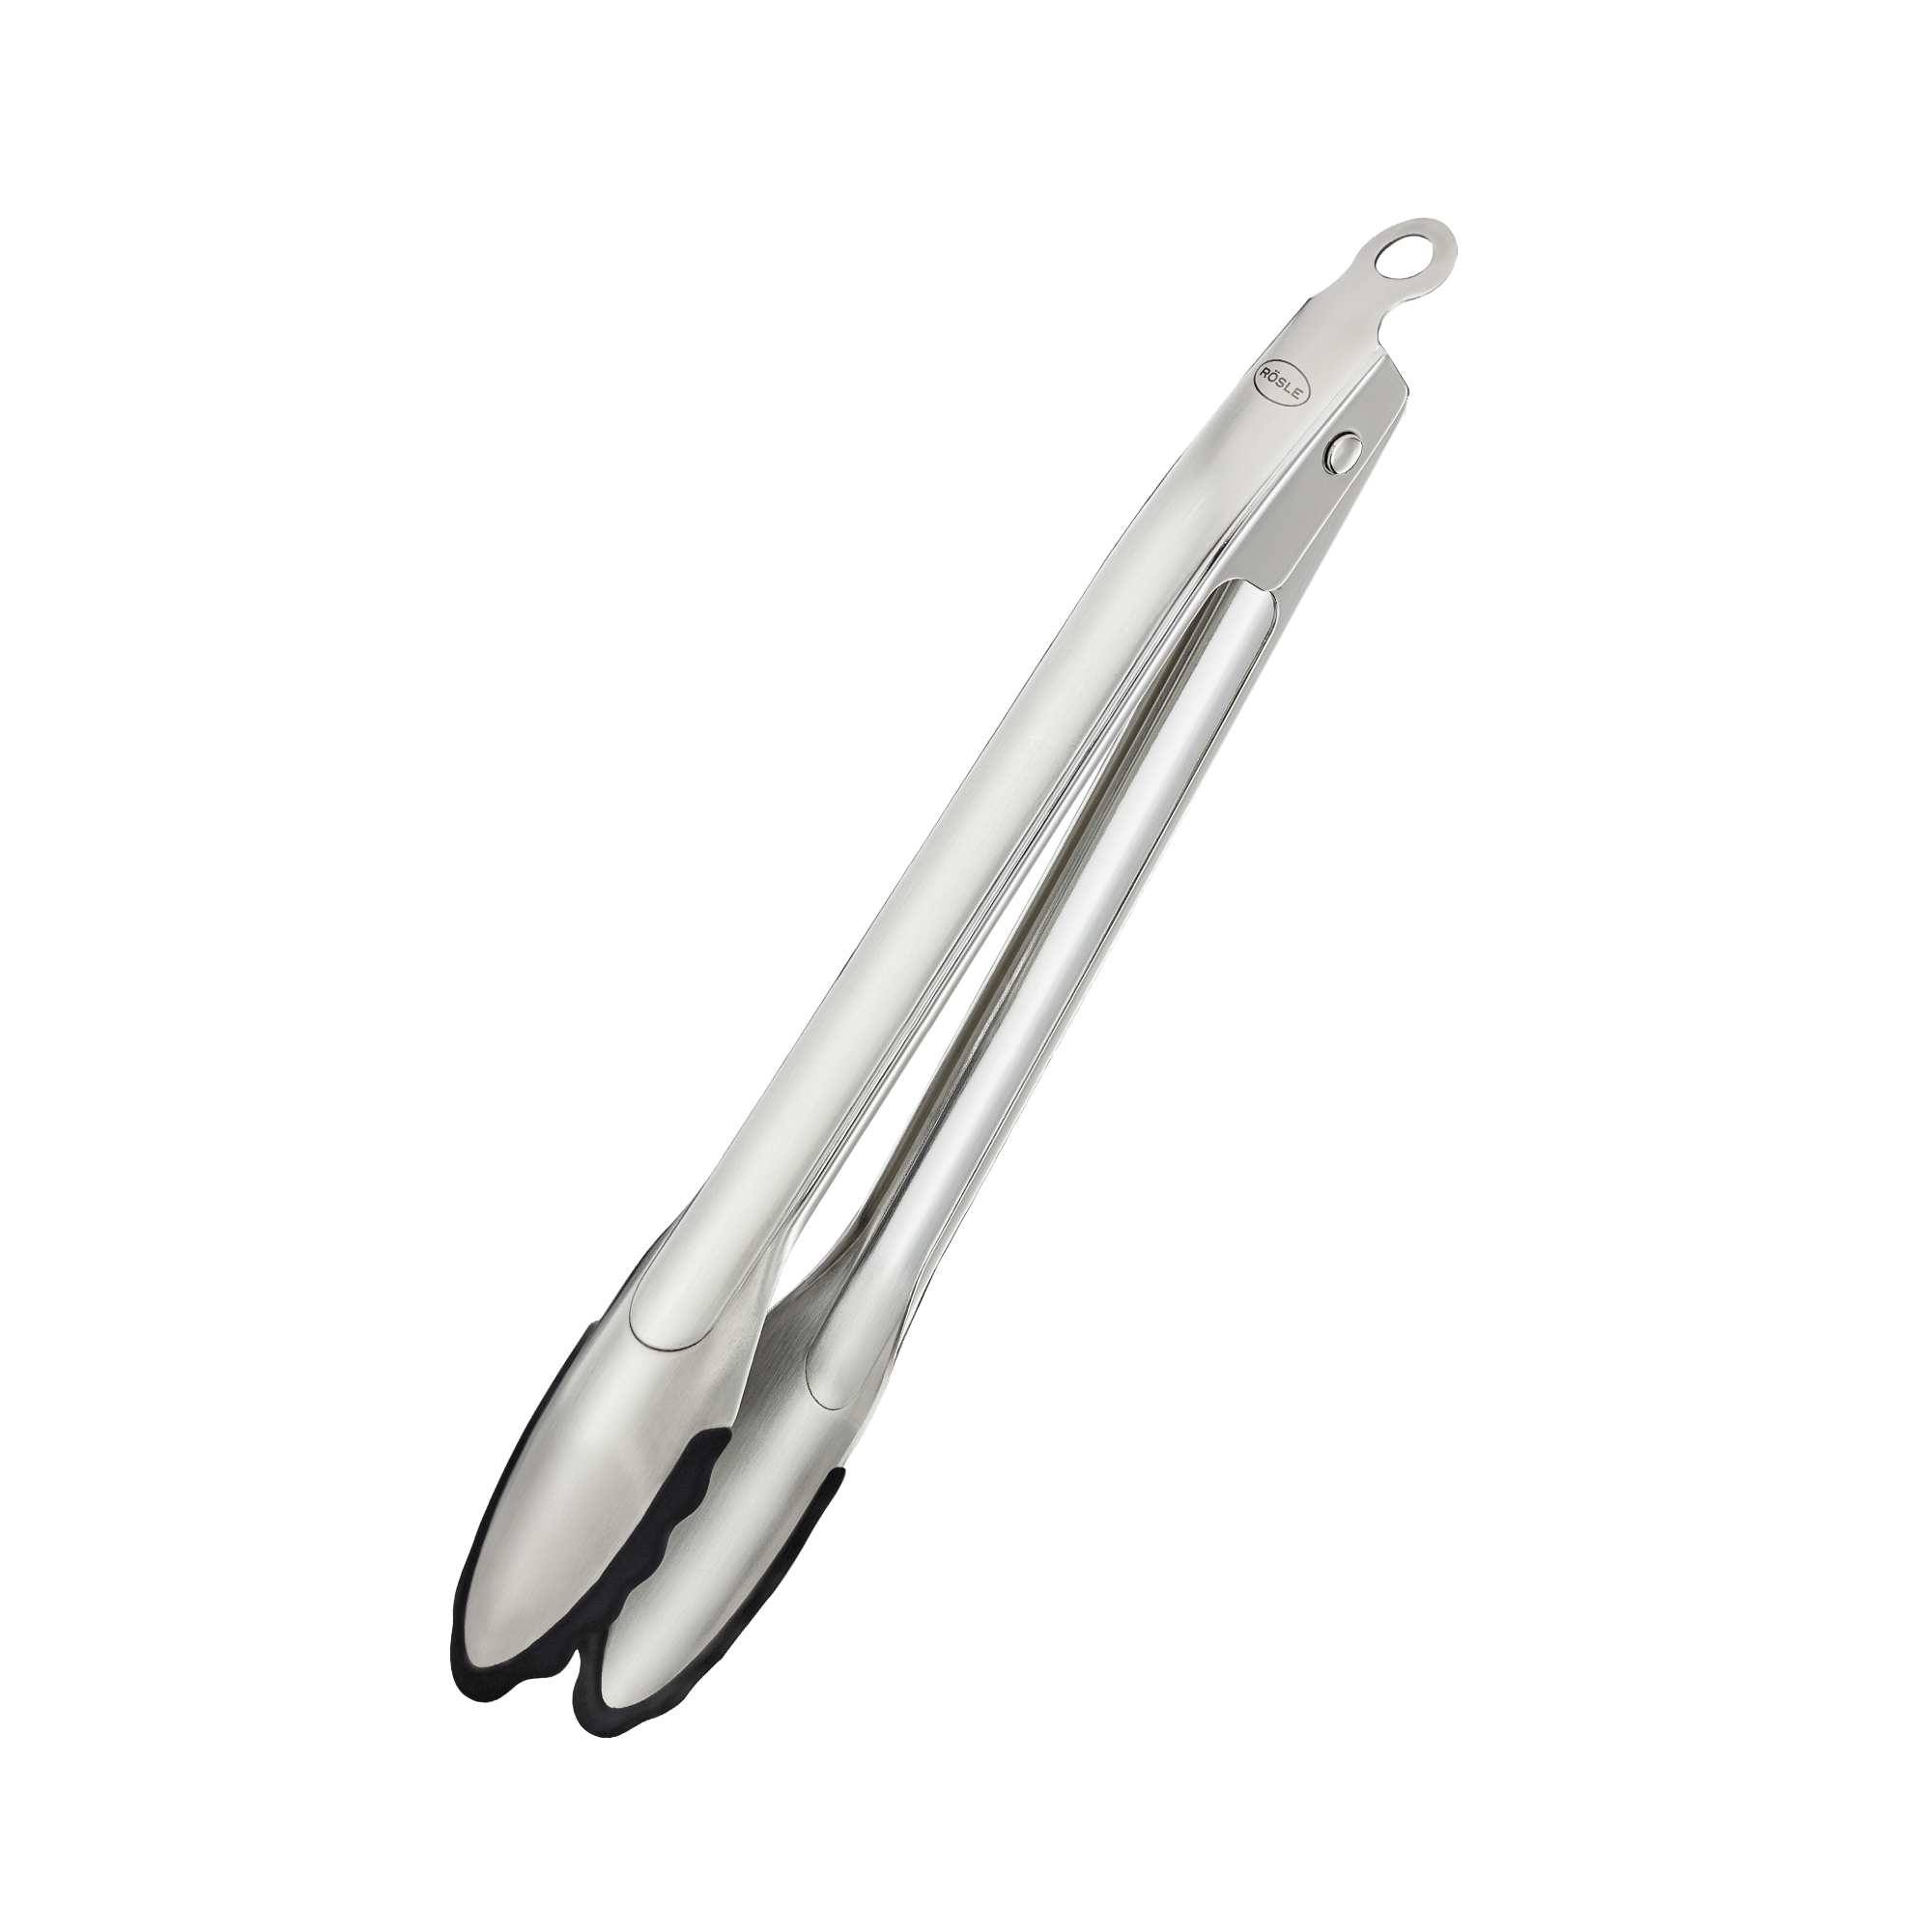 Locking Tongs silicone 23 cm | 9.1 in.